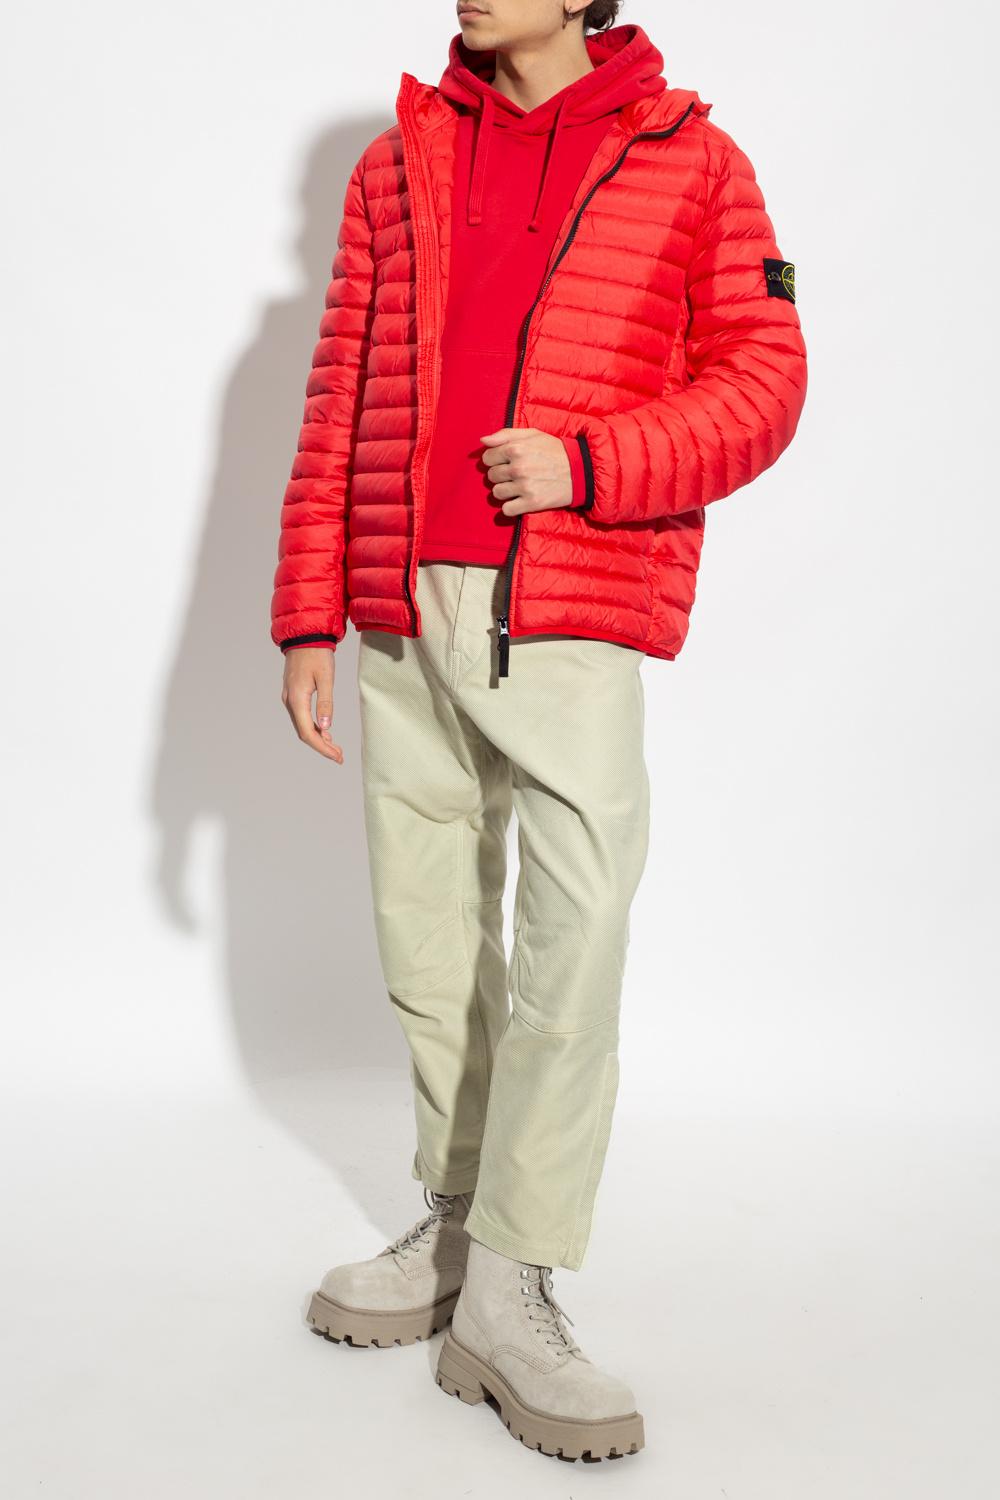 Stone Island Down Jacket in Red for Men | Lyst UK